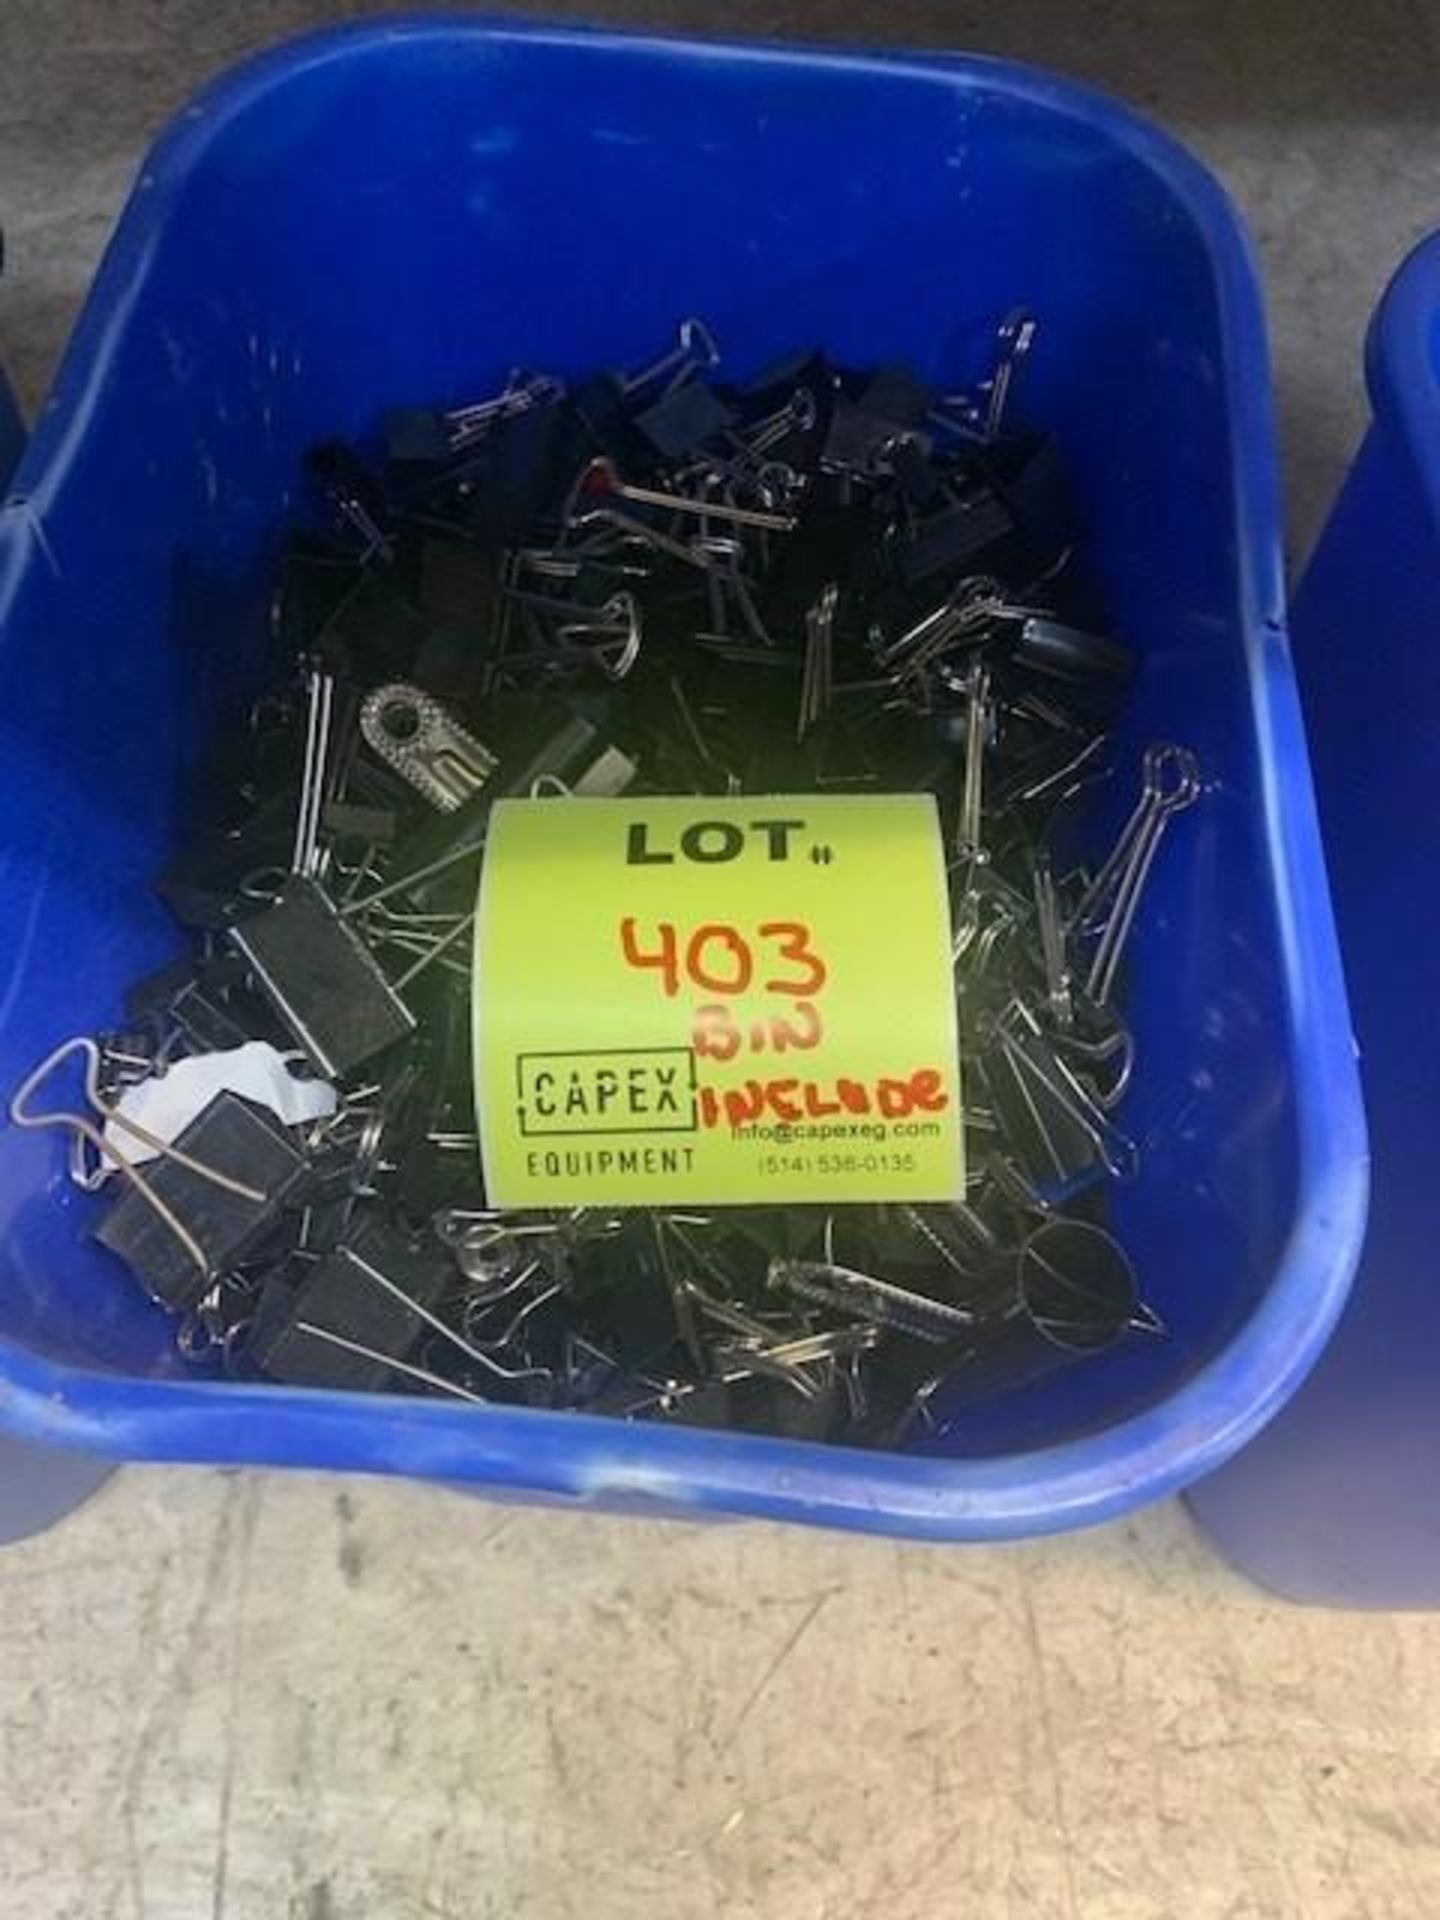 Bin fill with 500+ binder clips different size